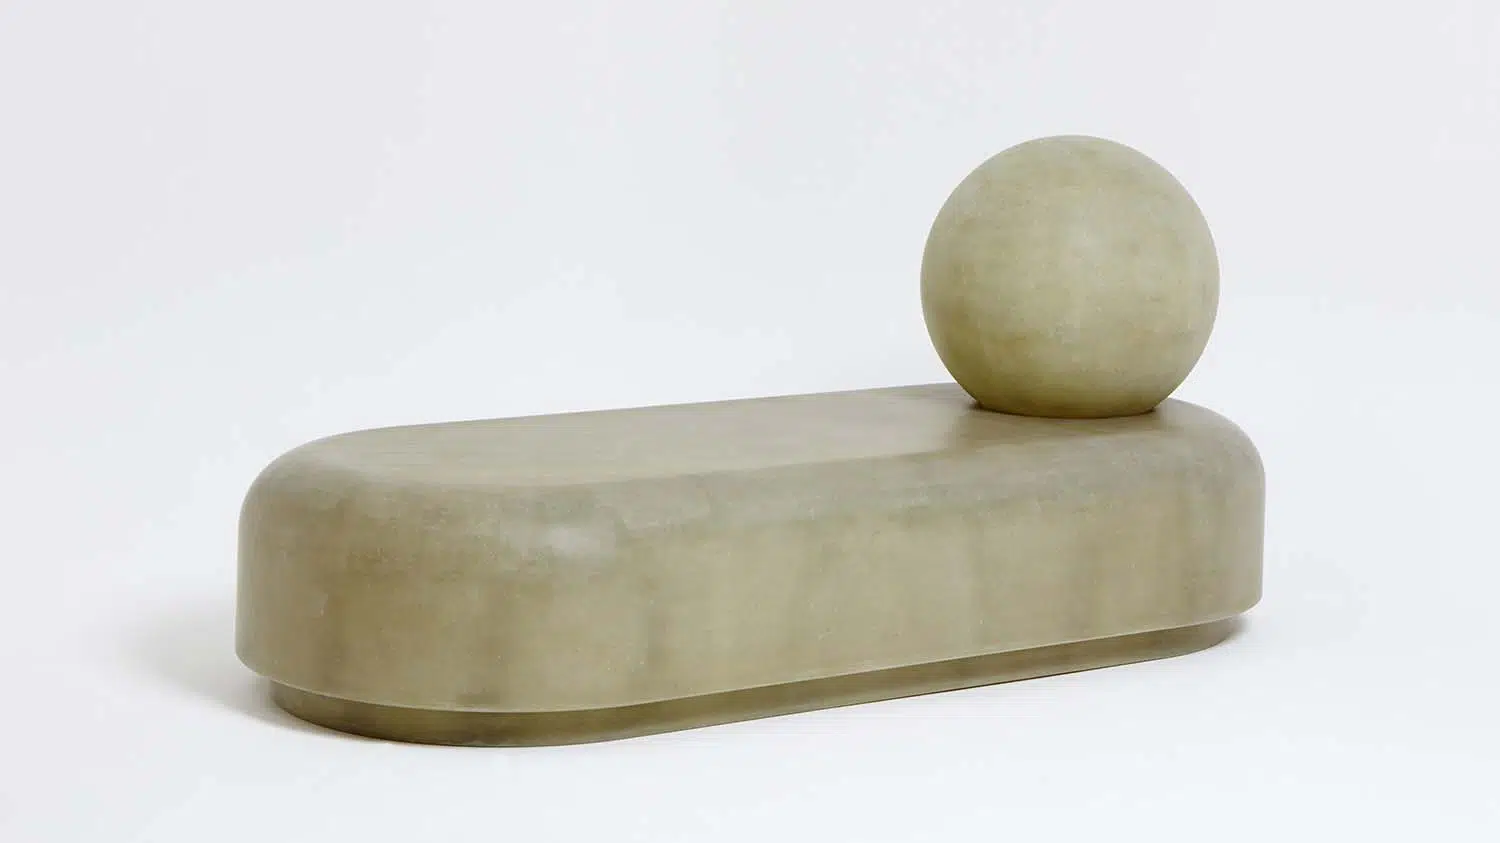 Roly Poly Daybed Raw. Faye Toogood. Mujeres diseñadoras